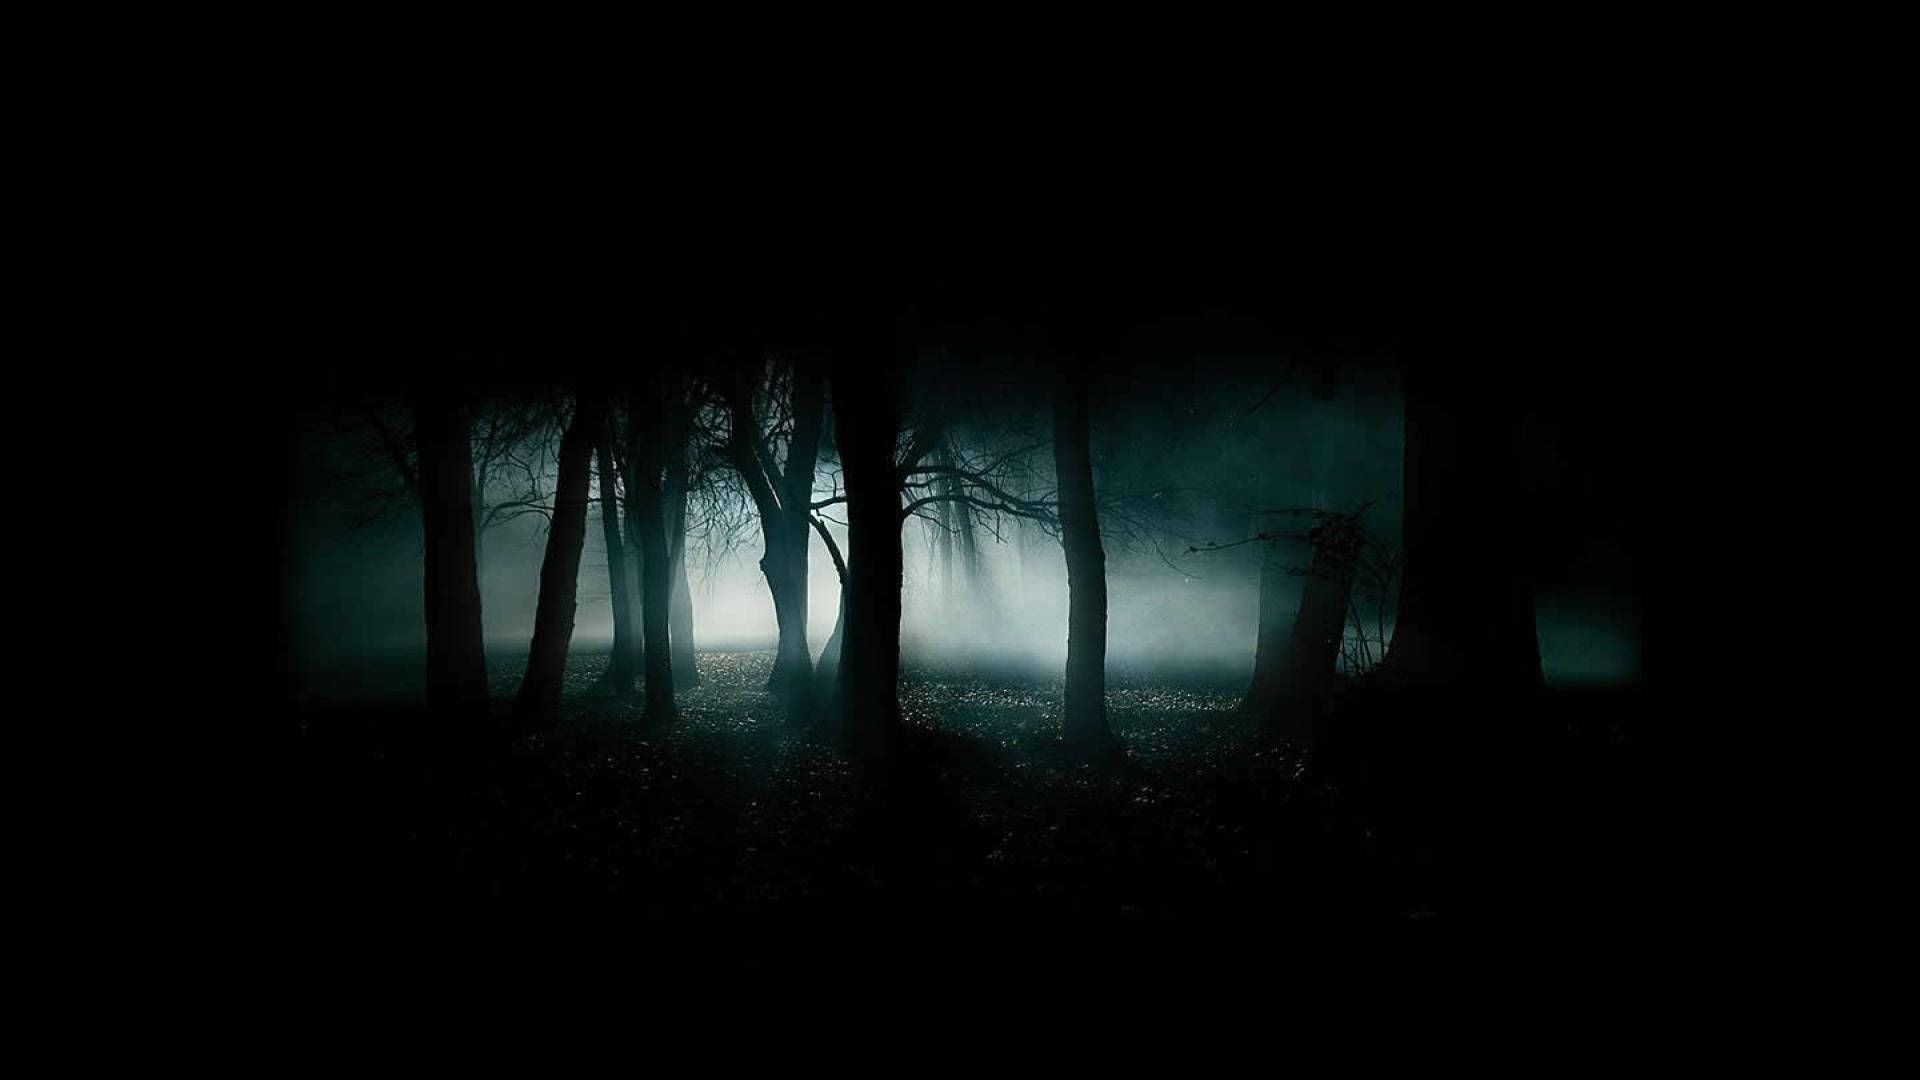 A dark forest with fog and trees - Creepy